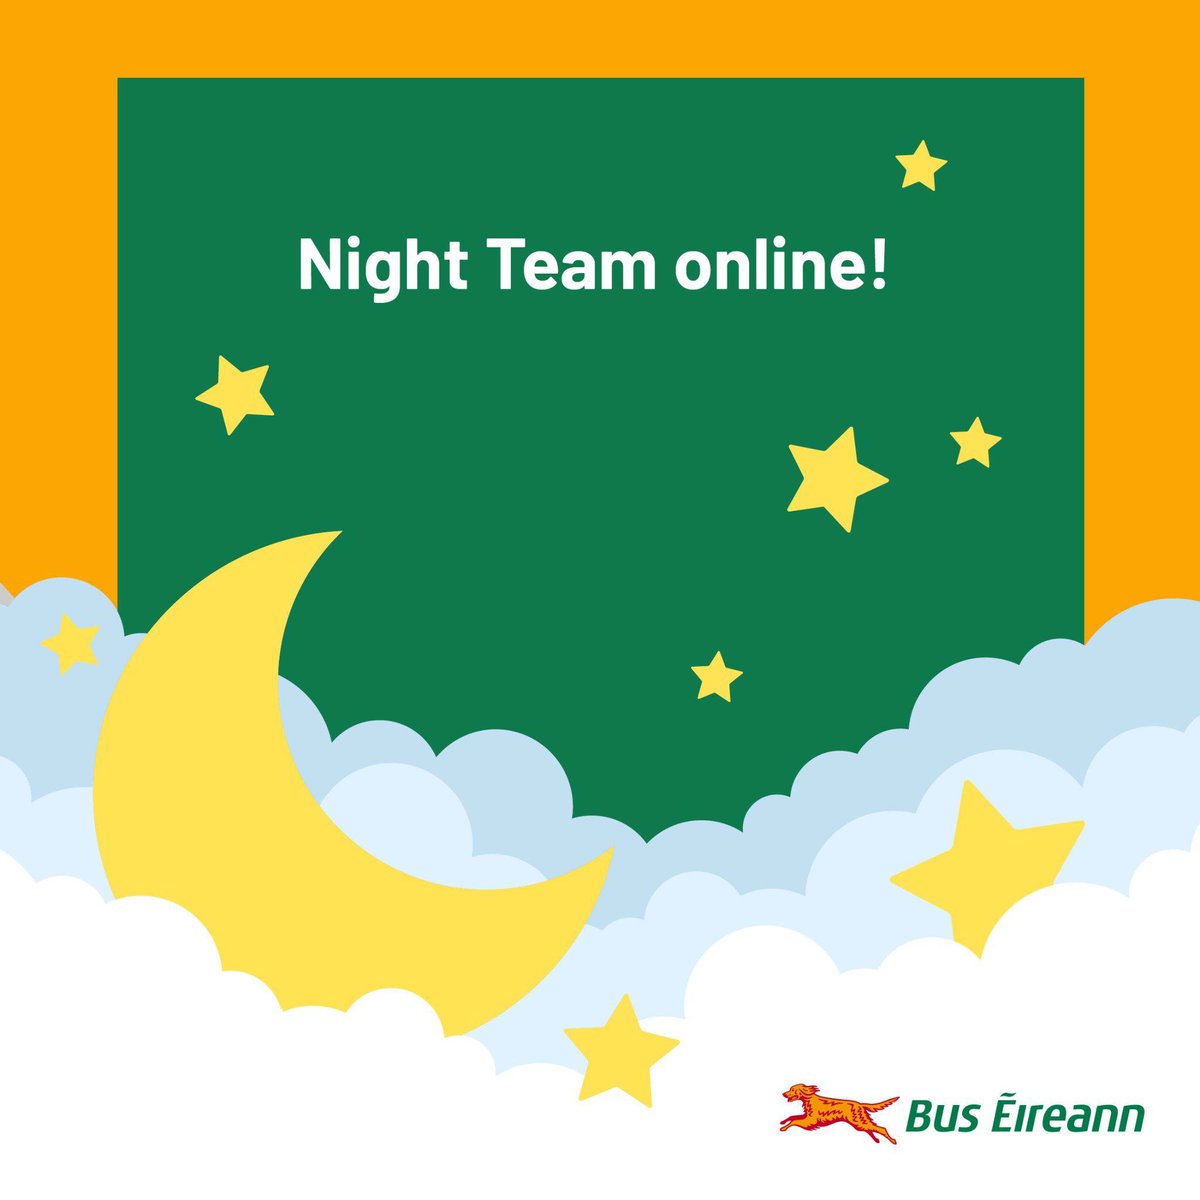 It’s bye for now, but you’re in safe hands with our night team. Be sure and get in touch if you need assistance with anything tonight. Ash